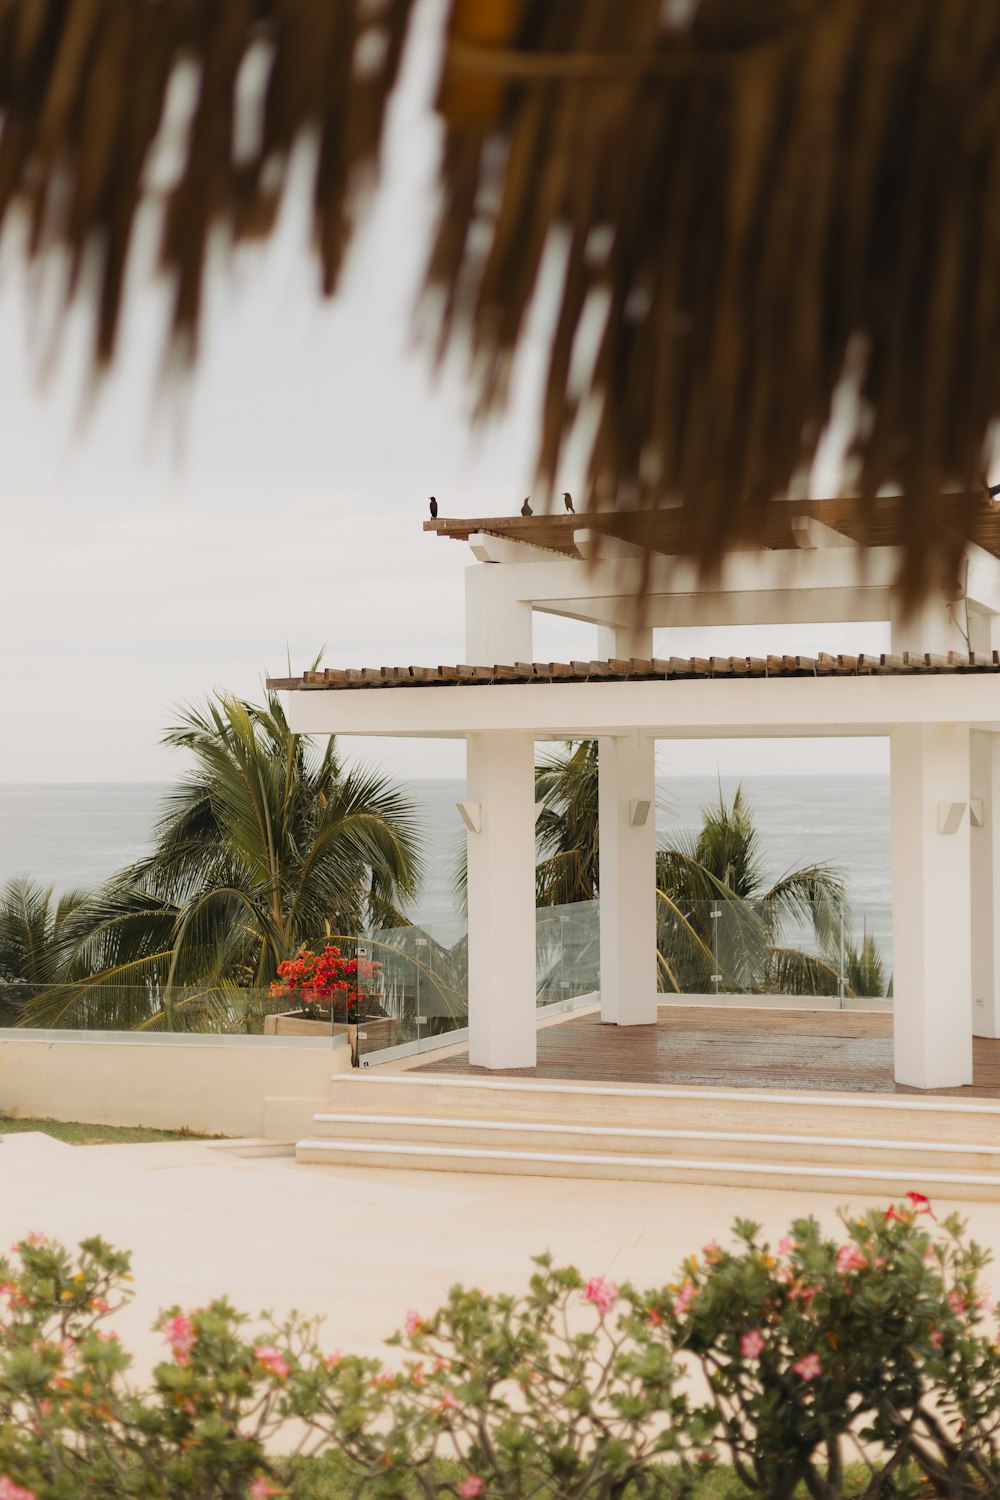 a gazebo with a view of the ocean in the background